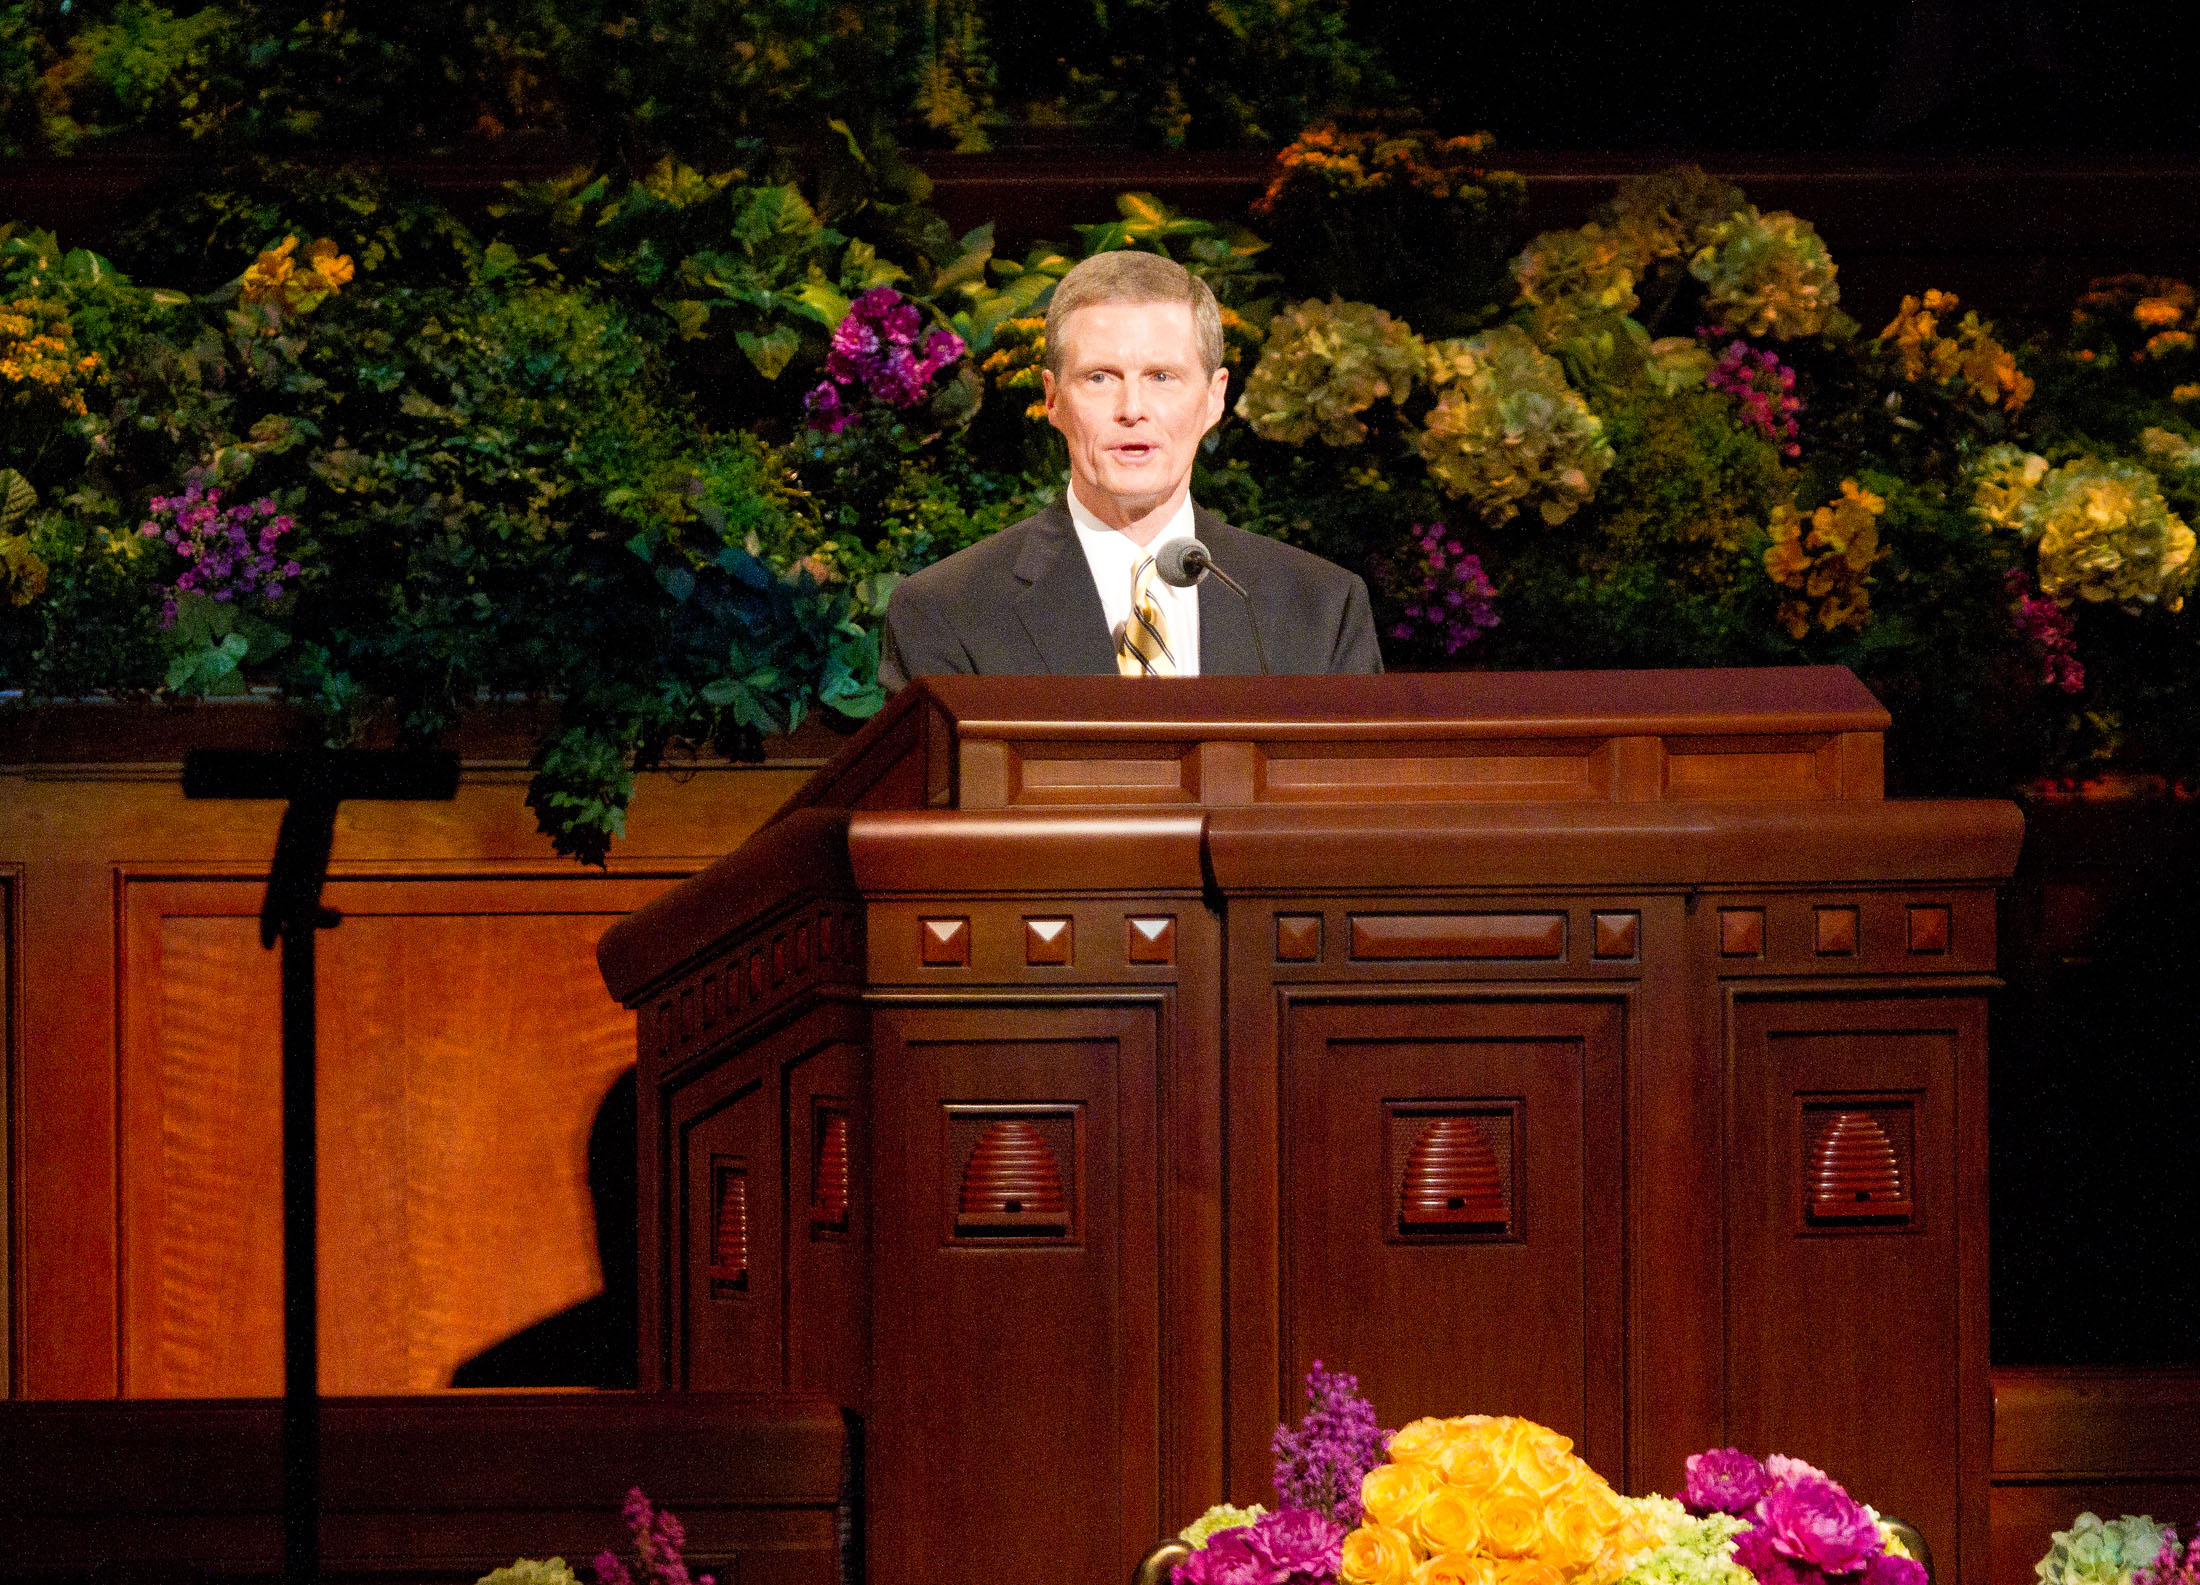 Saturday afternoon session 183rd annual General Conference The Daily